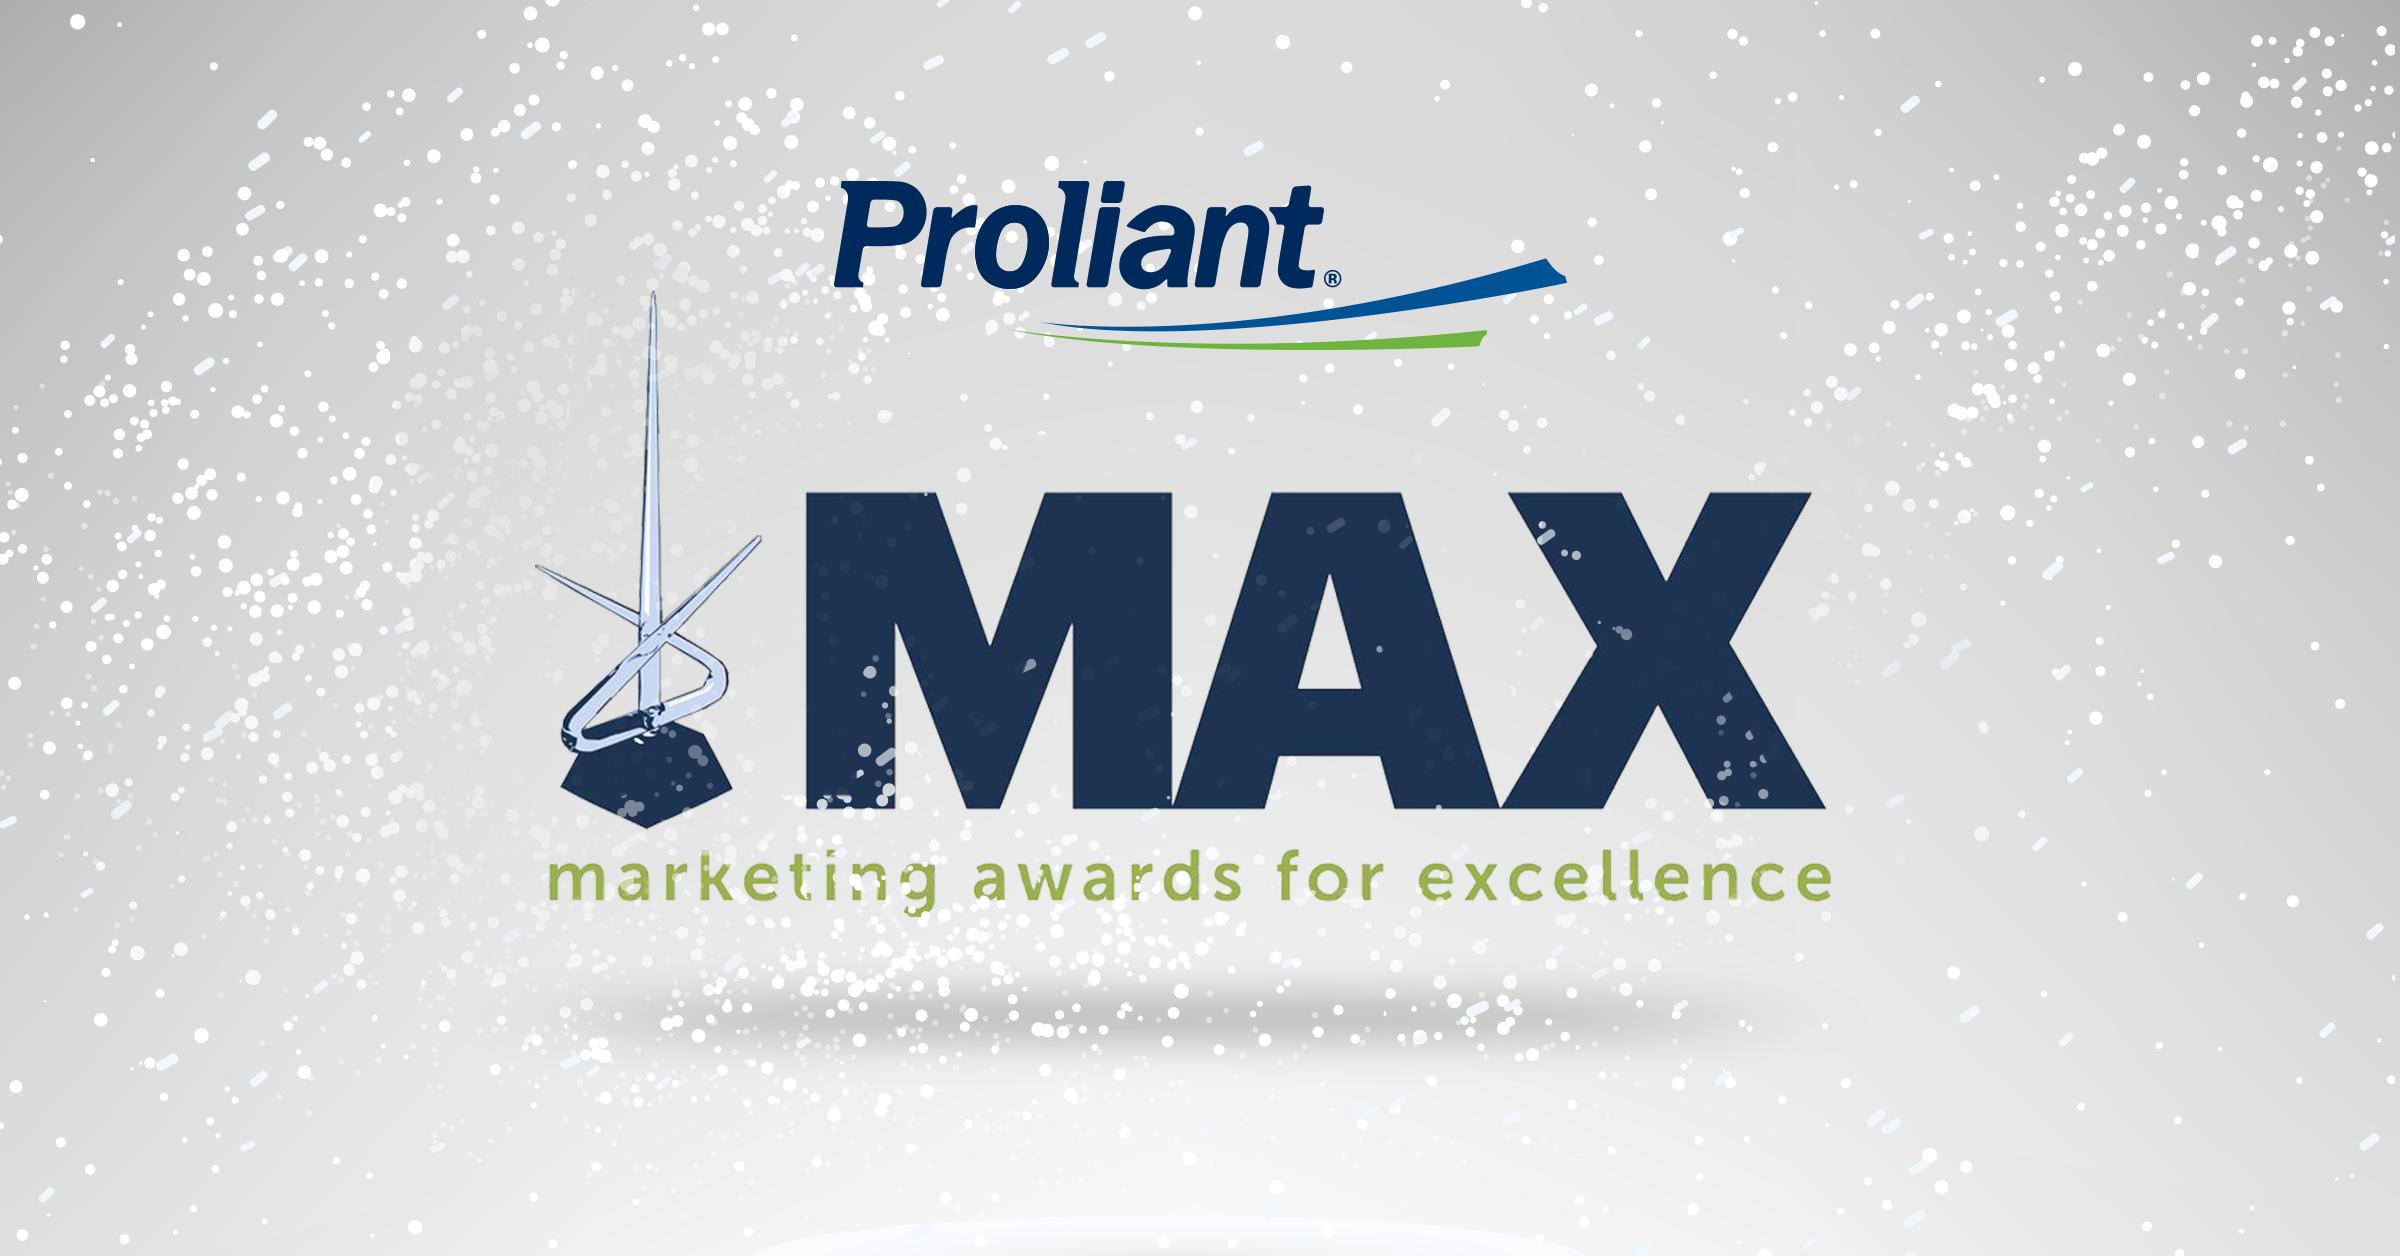 The 27th Annual MAX Awards Honor Proliant for Being Chosen as a Finalist for 2019.